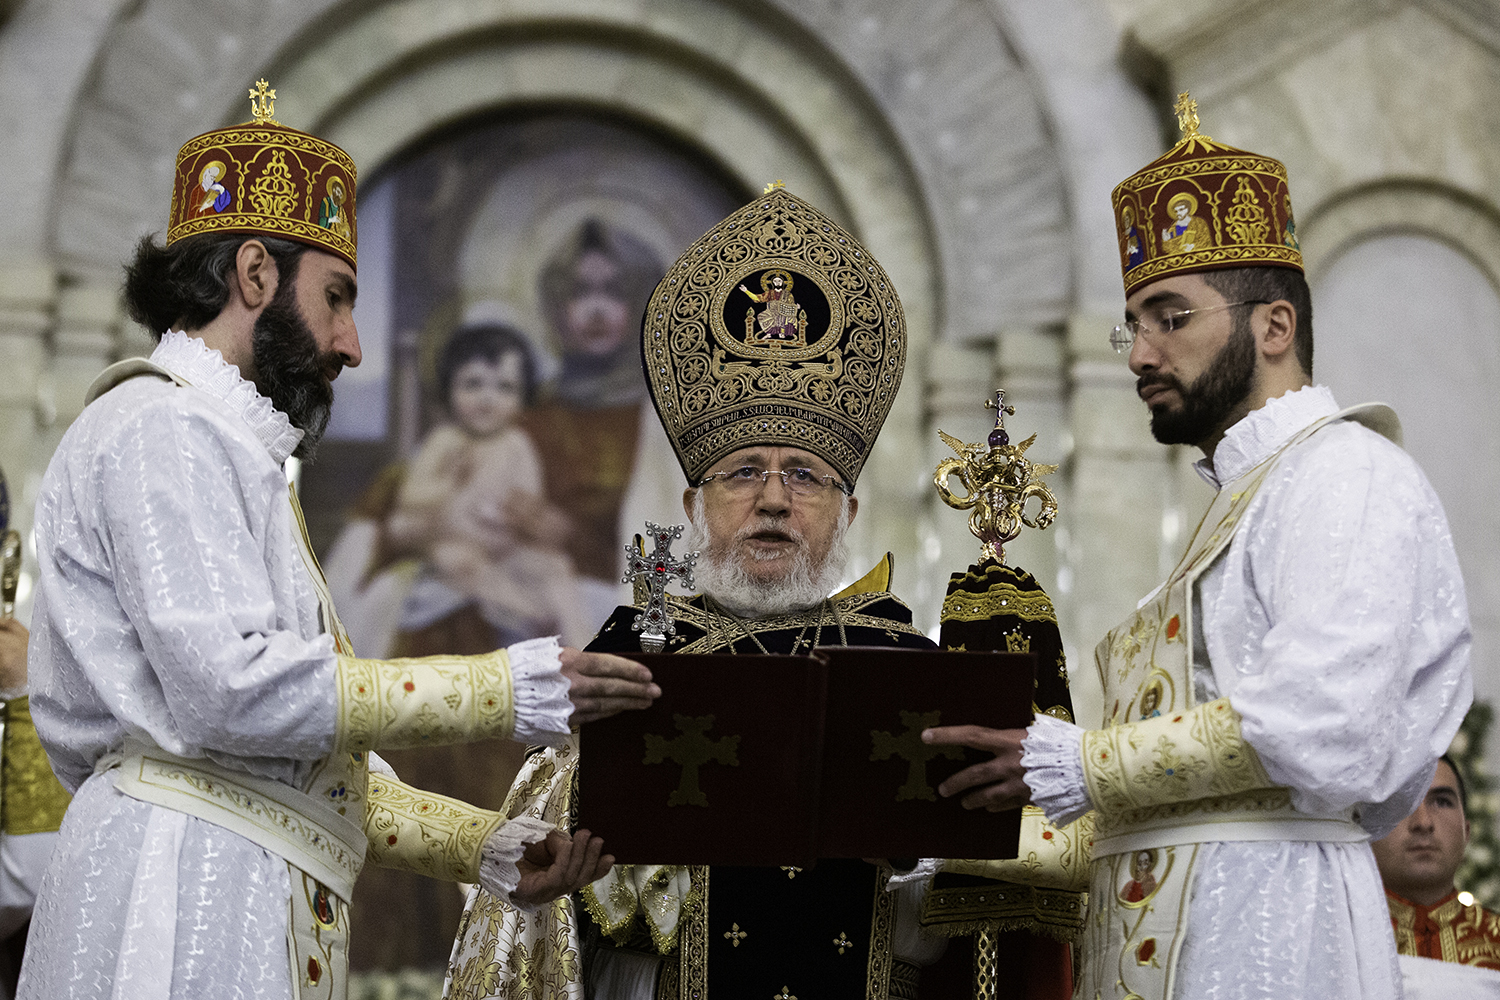 THE MESSAGE OF HIS HOLINESS KAREKIN II SUPREME PATRIARCH AND CATHOLICOS OF ALL ARMENIANS ON THE FEAST OF THE HOLY NATIVITY AND THEOPHANY OF OUR LORD JESUS CHRIST